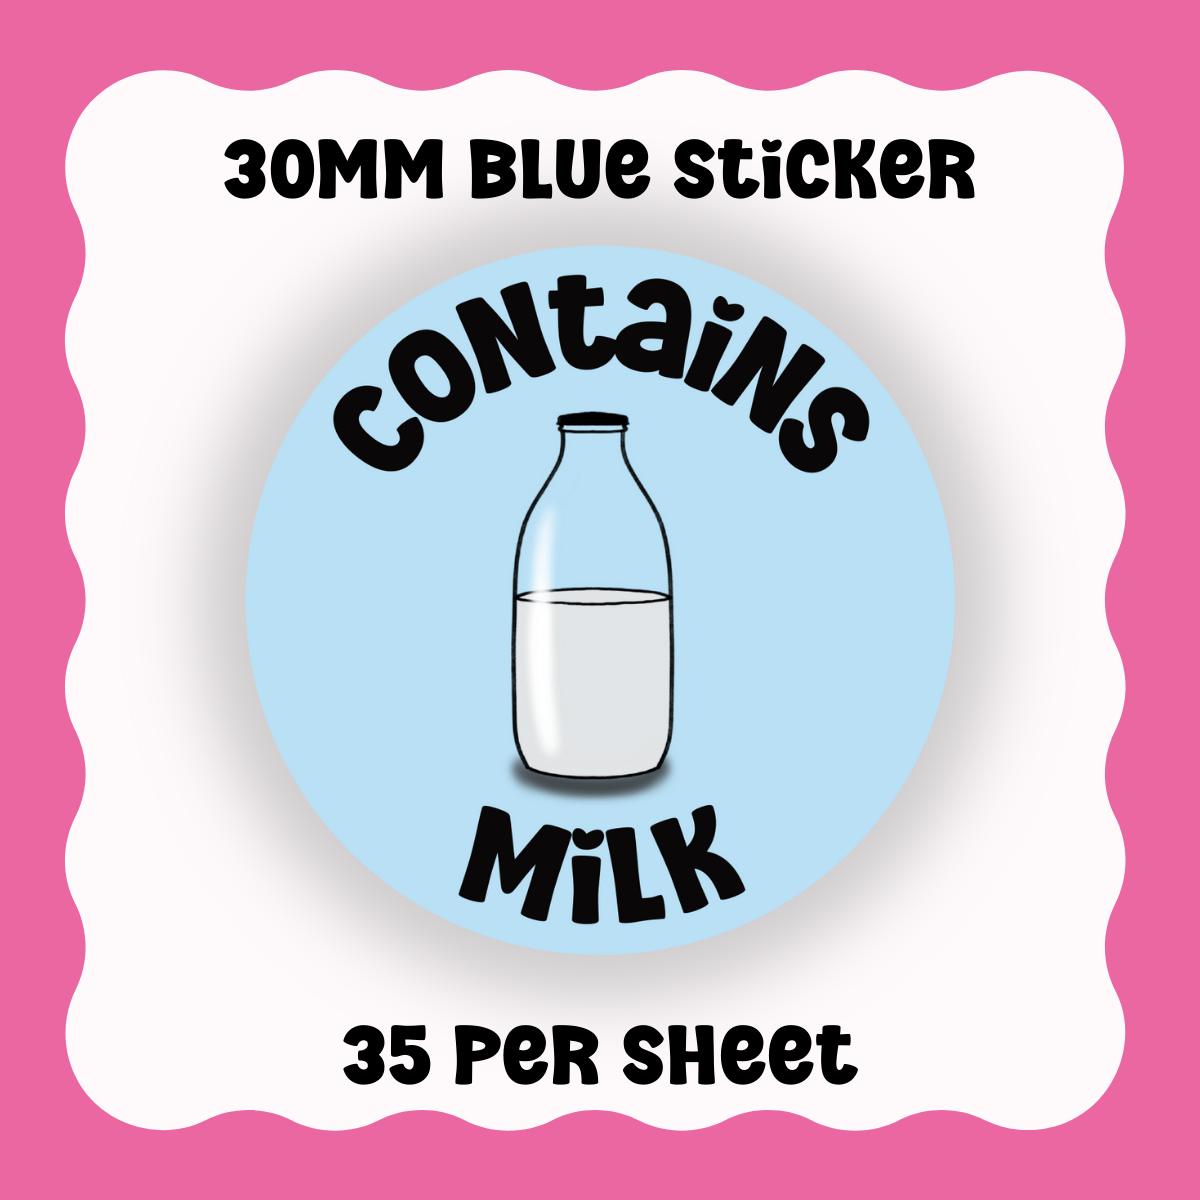 Contains Milk - With Graphic